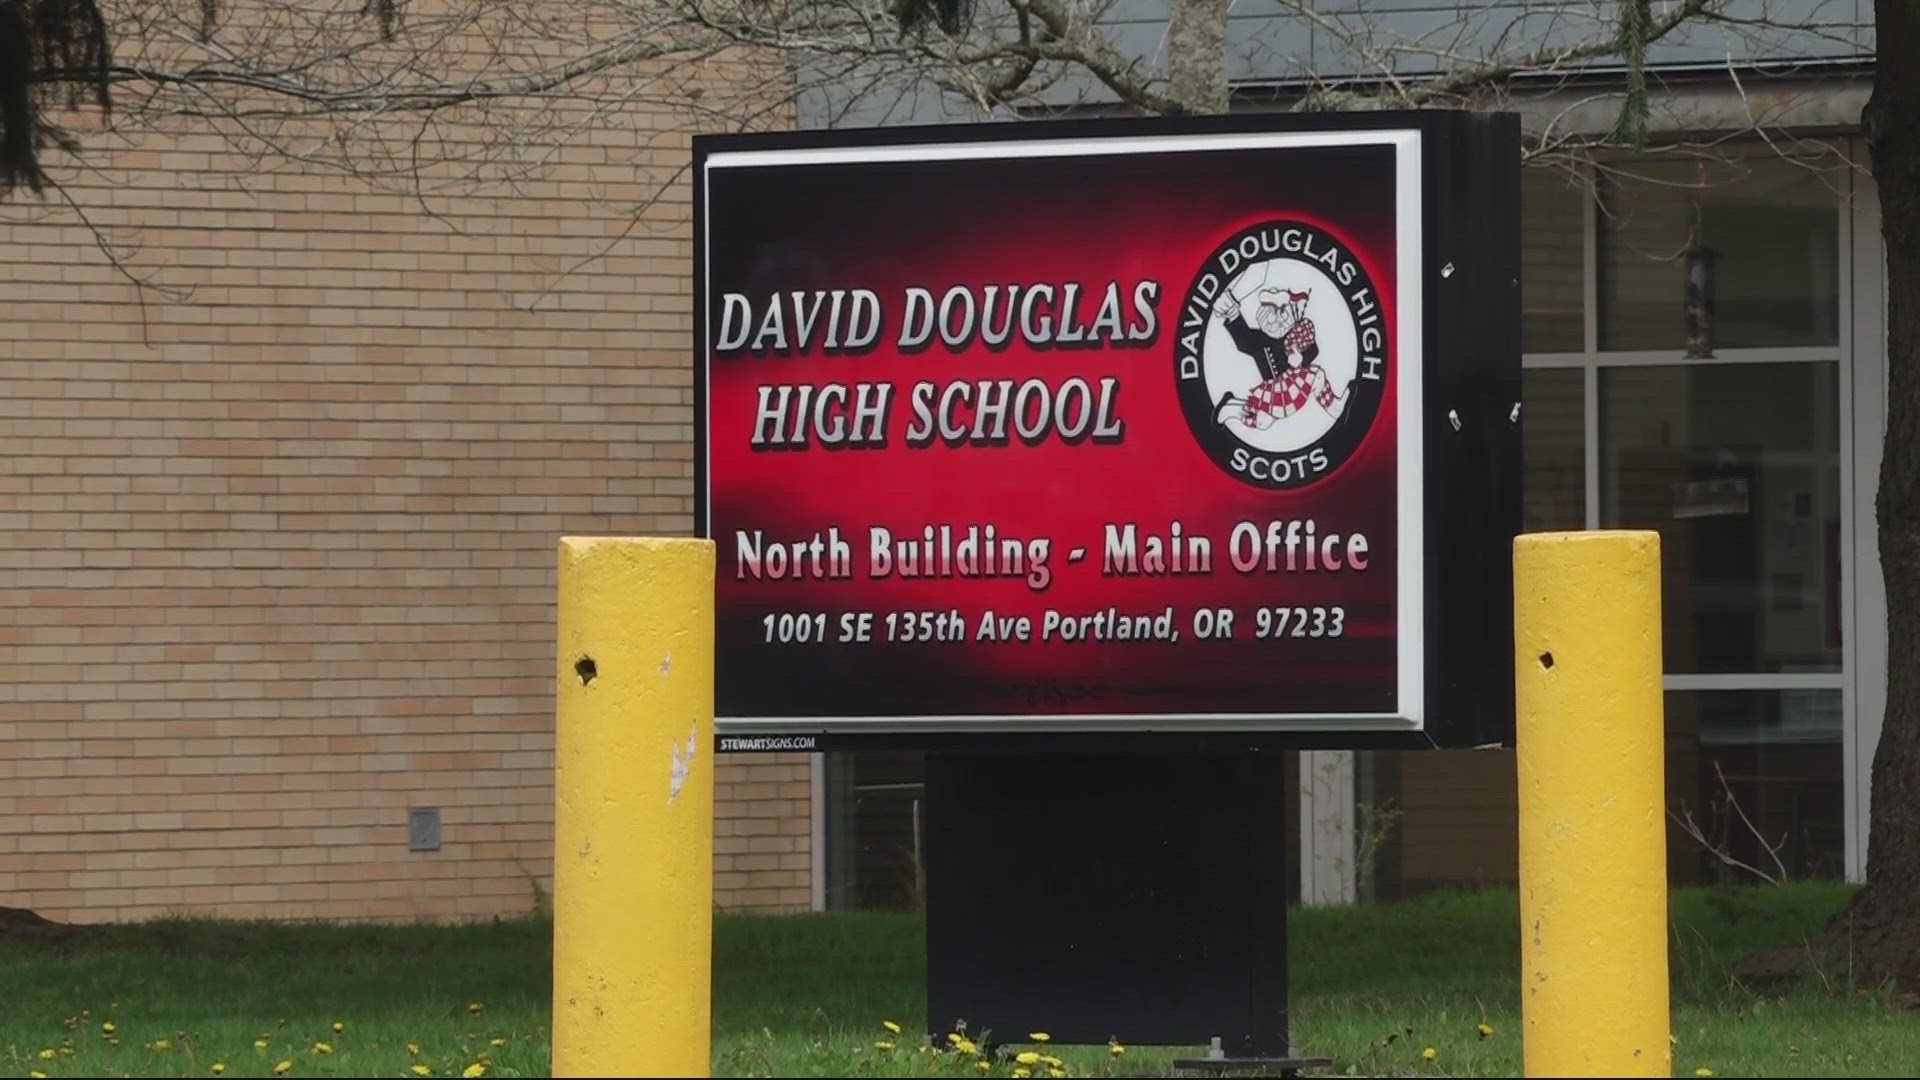 With limited seats, each graduating senior at David Douglas High School gets four tickets, leaving families with tough decisions about who can attend.